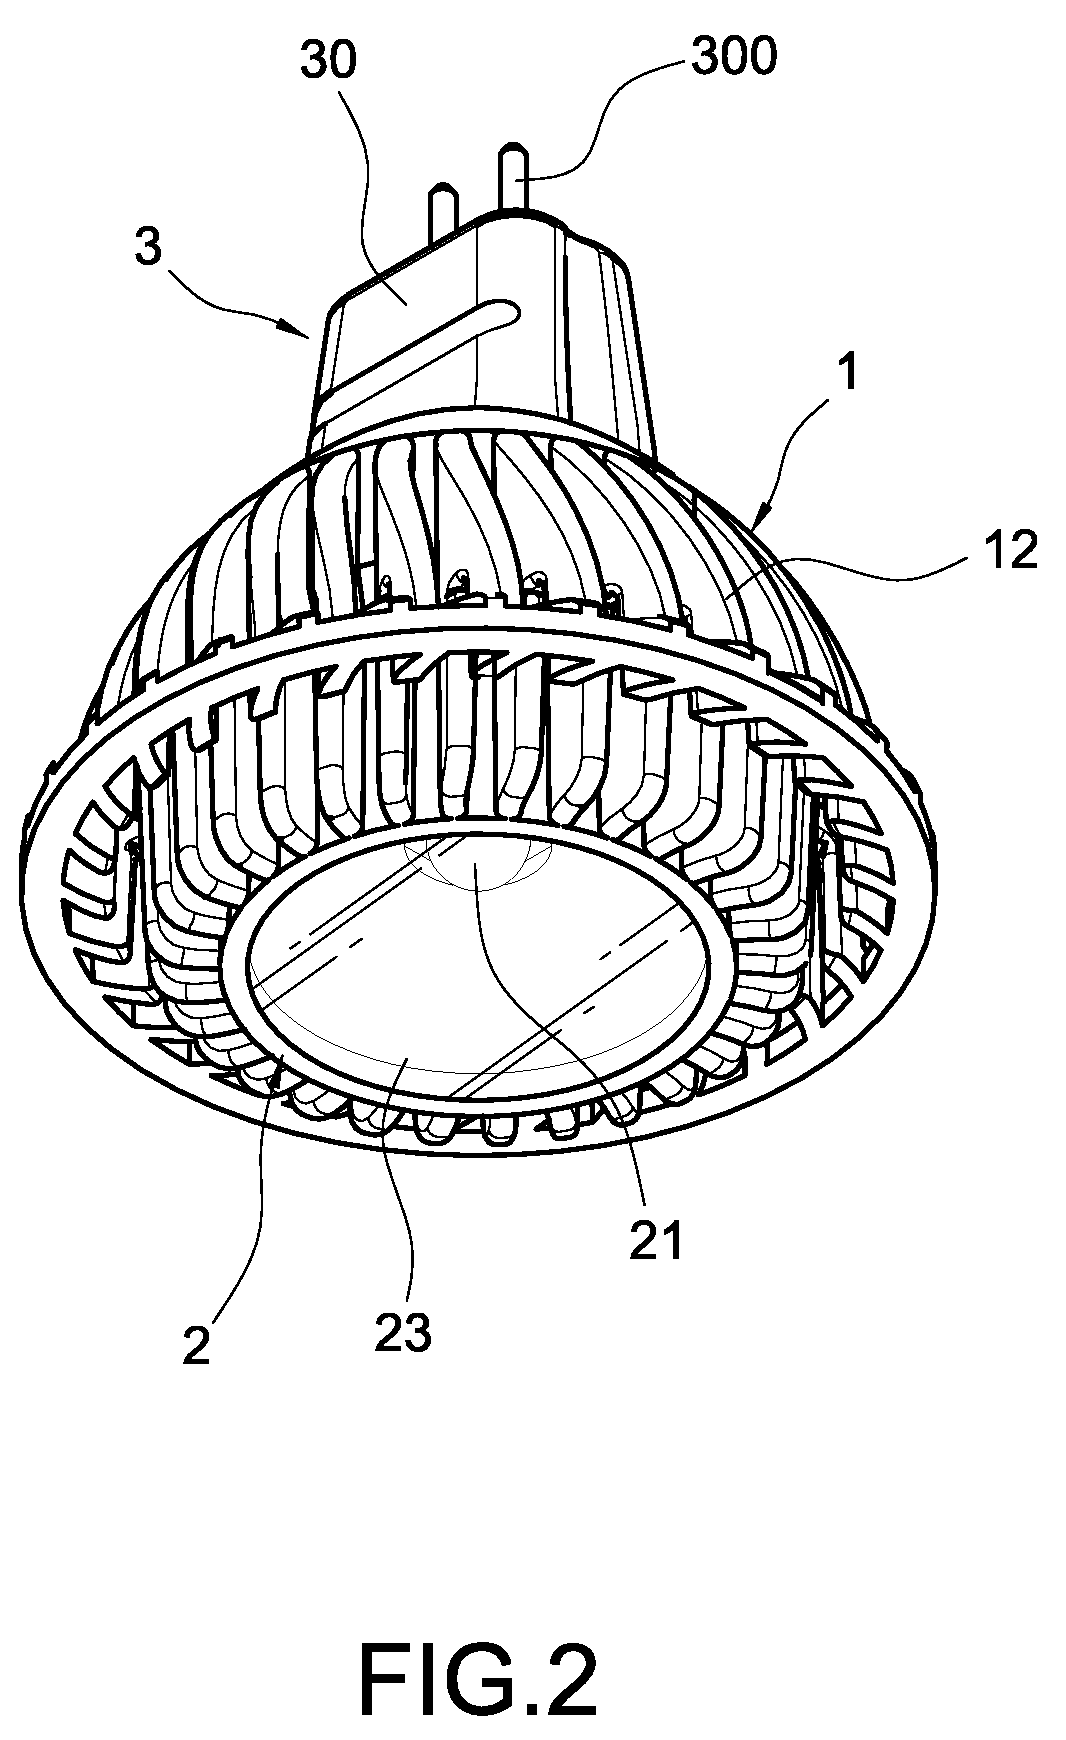 Lamp with heat conducting structure and lamp cover thereof